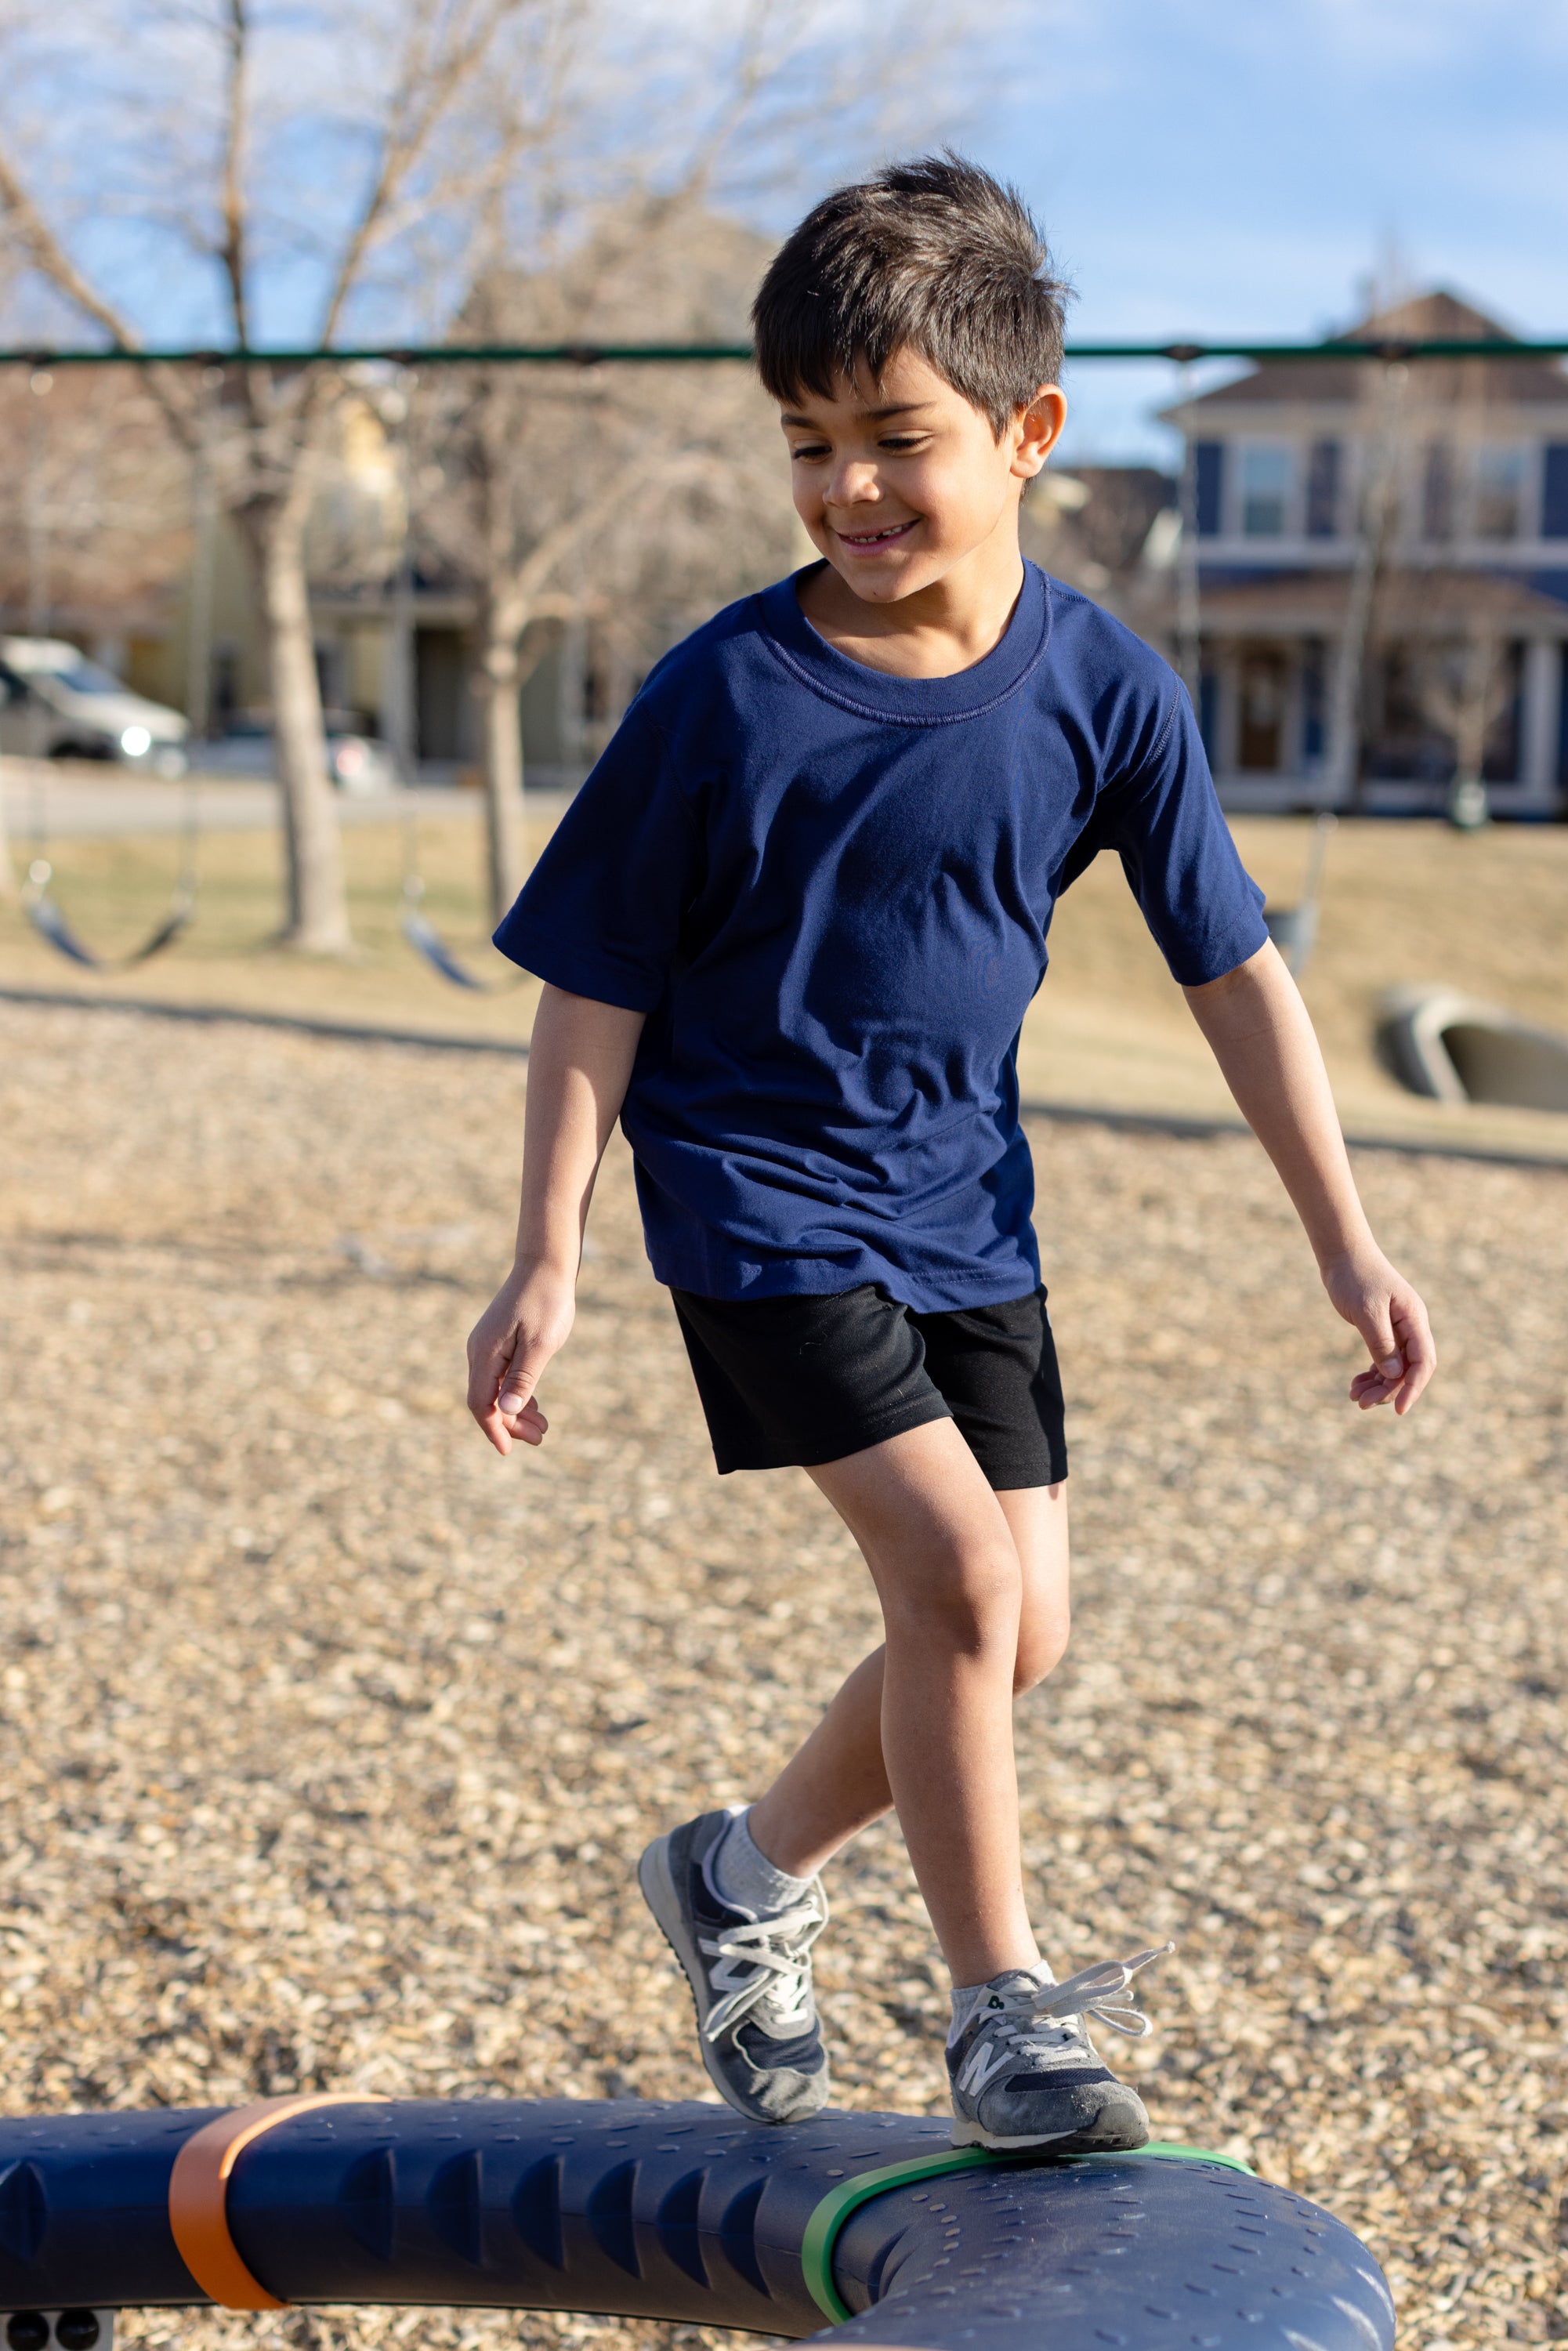 A little boy playing in the park, he is wearing a navy basic crewneck t-shirt and black shorts. You can see swing sets blurred out in the background of the photo.